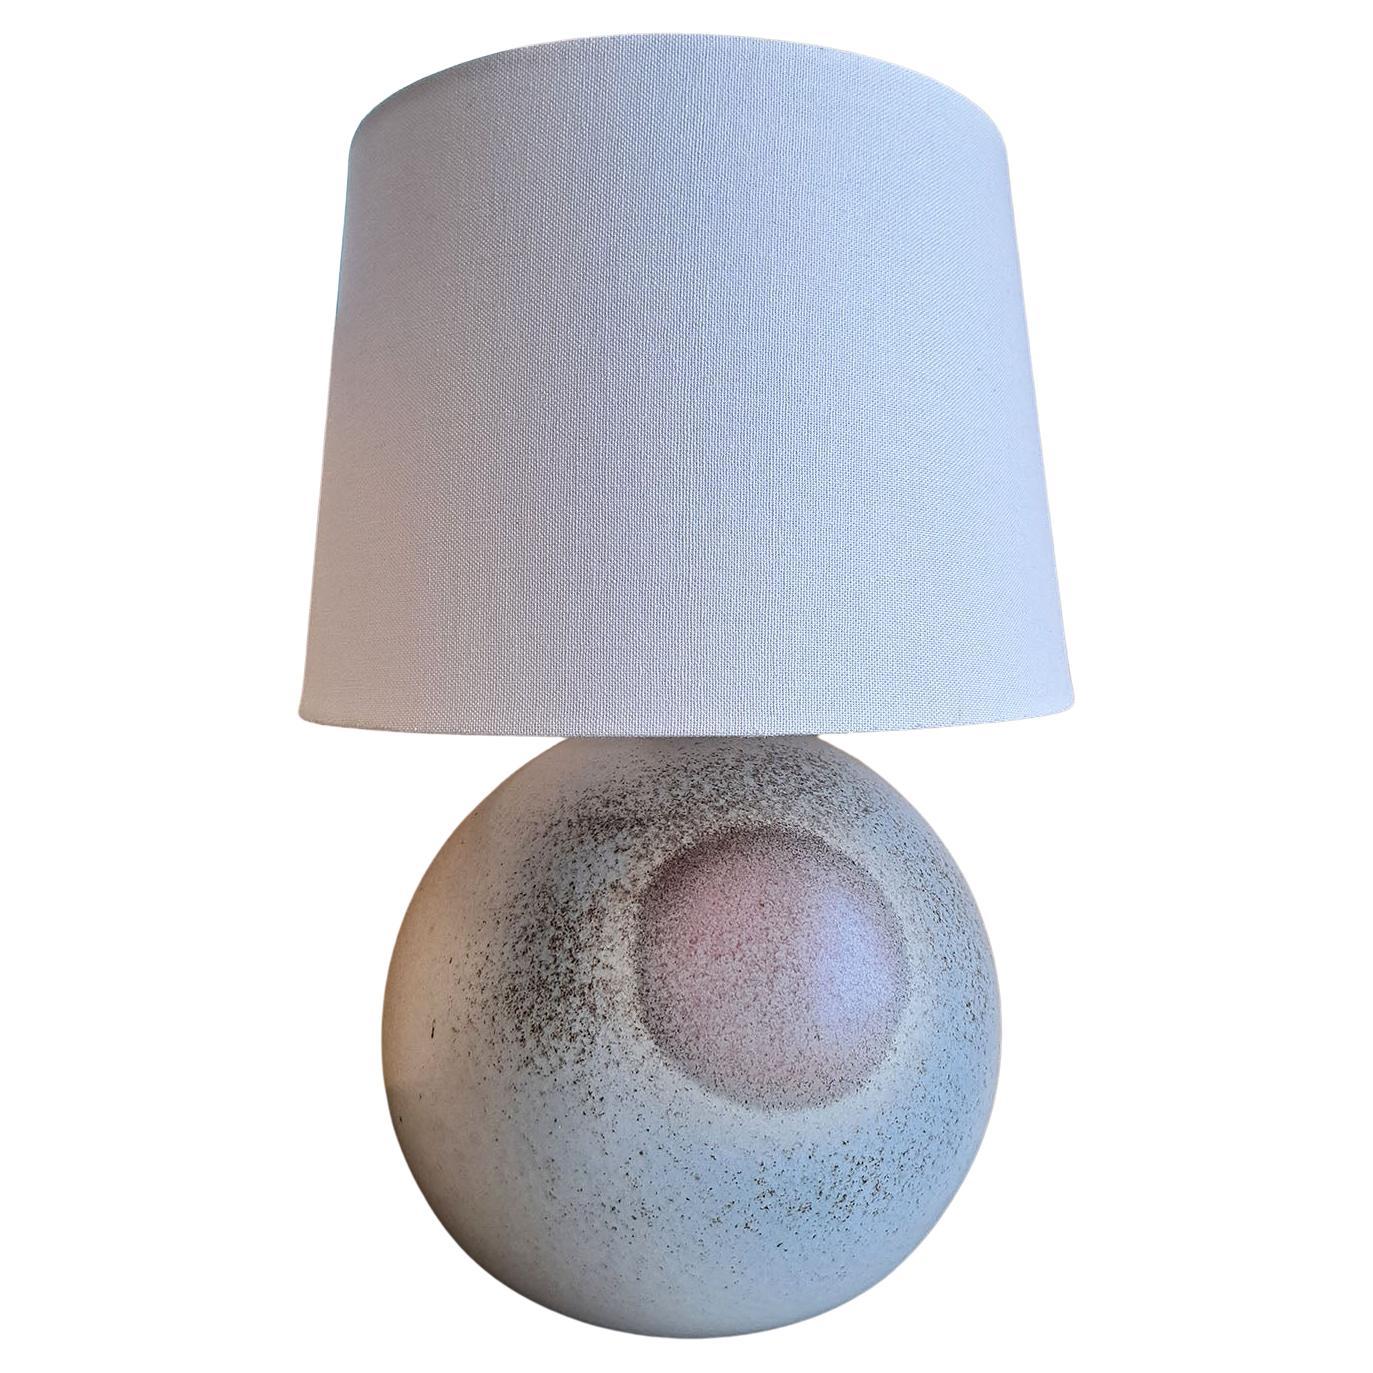 Earthenware Ceramic Lamp by Yves Mohy for Virebent, 1979s. This ceramic table lamp features a circular shape with various colour pigments, showing a darker shade in the middle... Designed by ceramist Yves Mohy for Virebent in the late 70s.

Shade